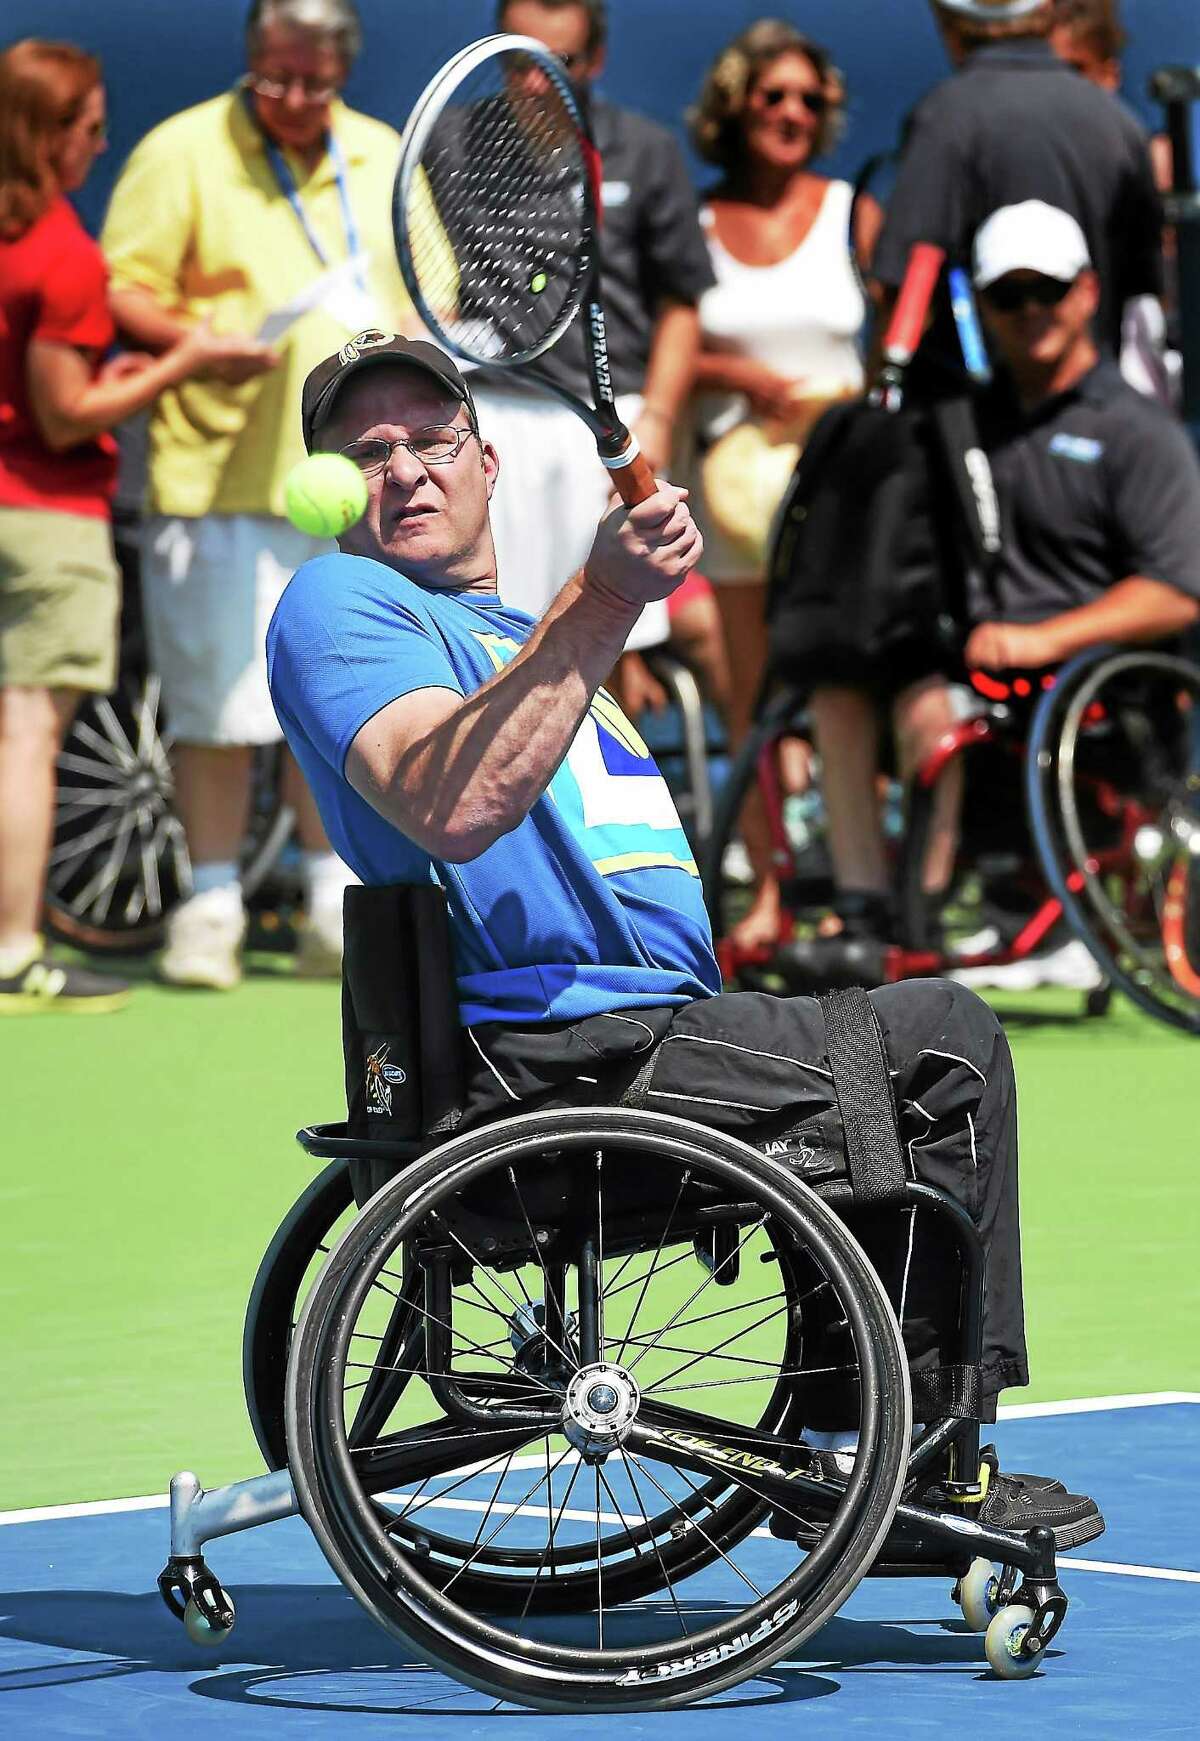 (Mara Lavitt ó New Haven Register) August 20, 2014 New Haven Gaylord Sports Assoc. brought wheelchair tennis team members, as well as athletes from the Magic Lincer Tennis Academy in Windsor to conduct an adaptive tennis demonstration at the Connecticut Open. Ryan Martin of Monroe returns. mlavitt@newhavenregister.com